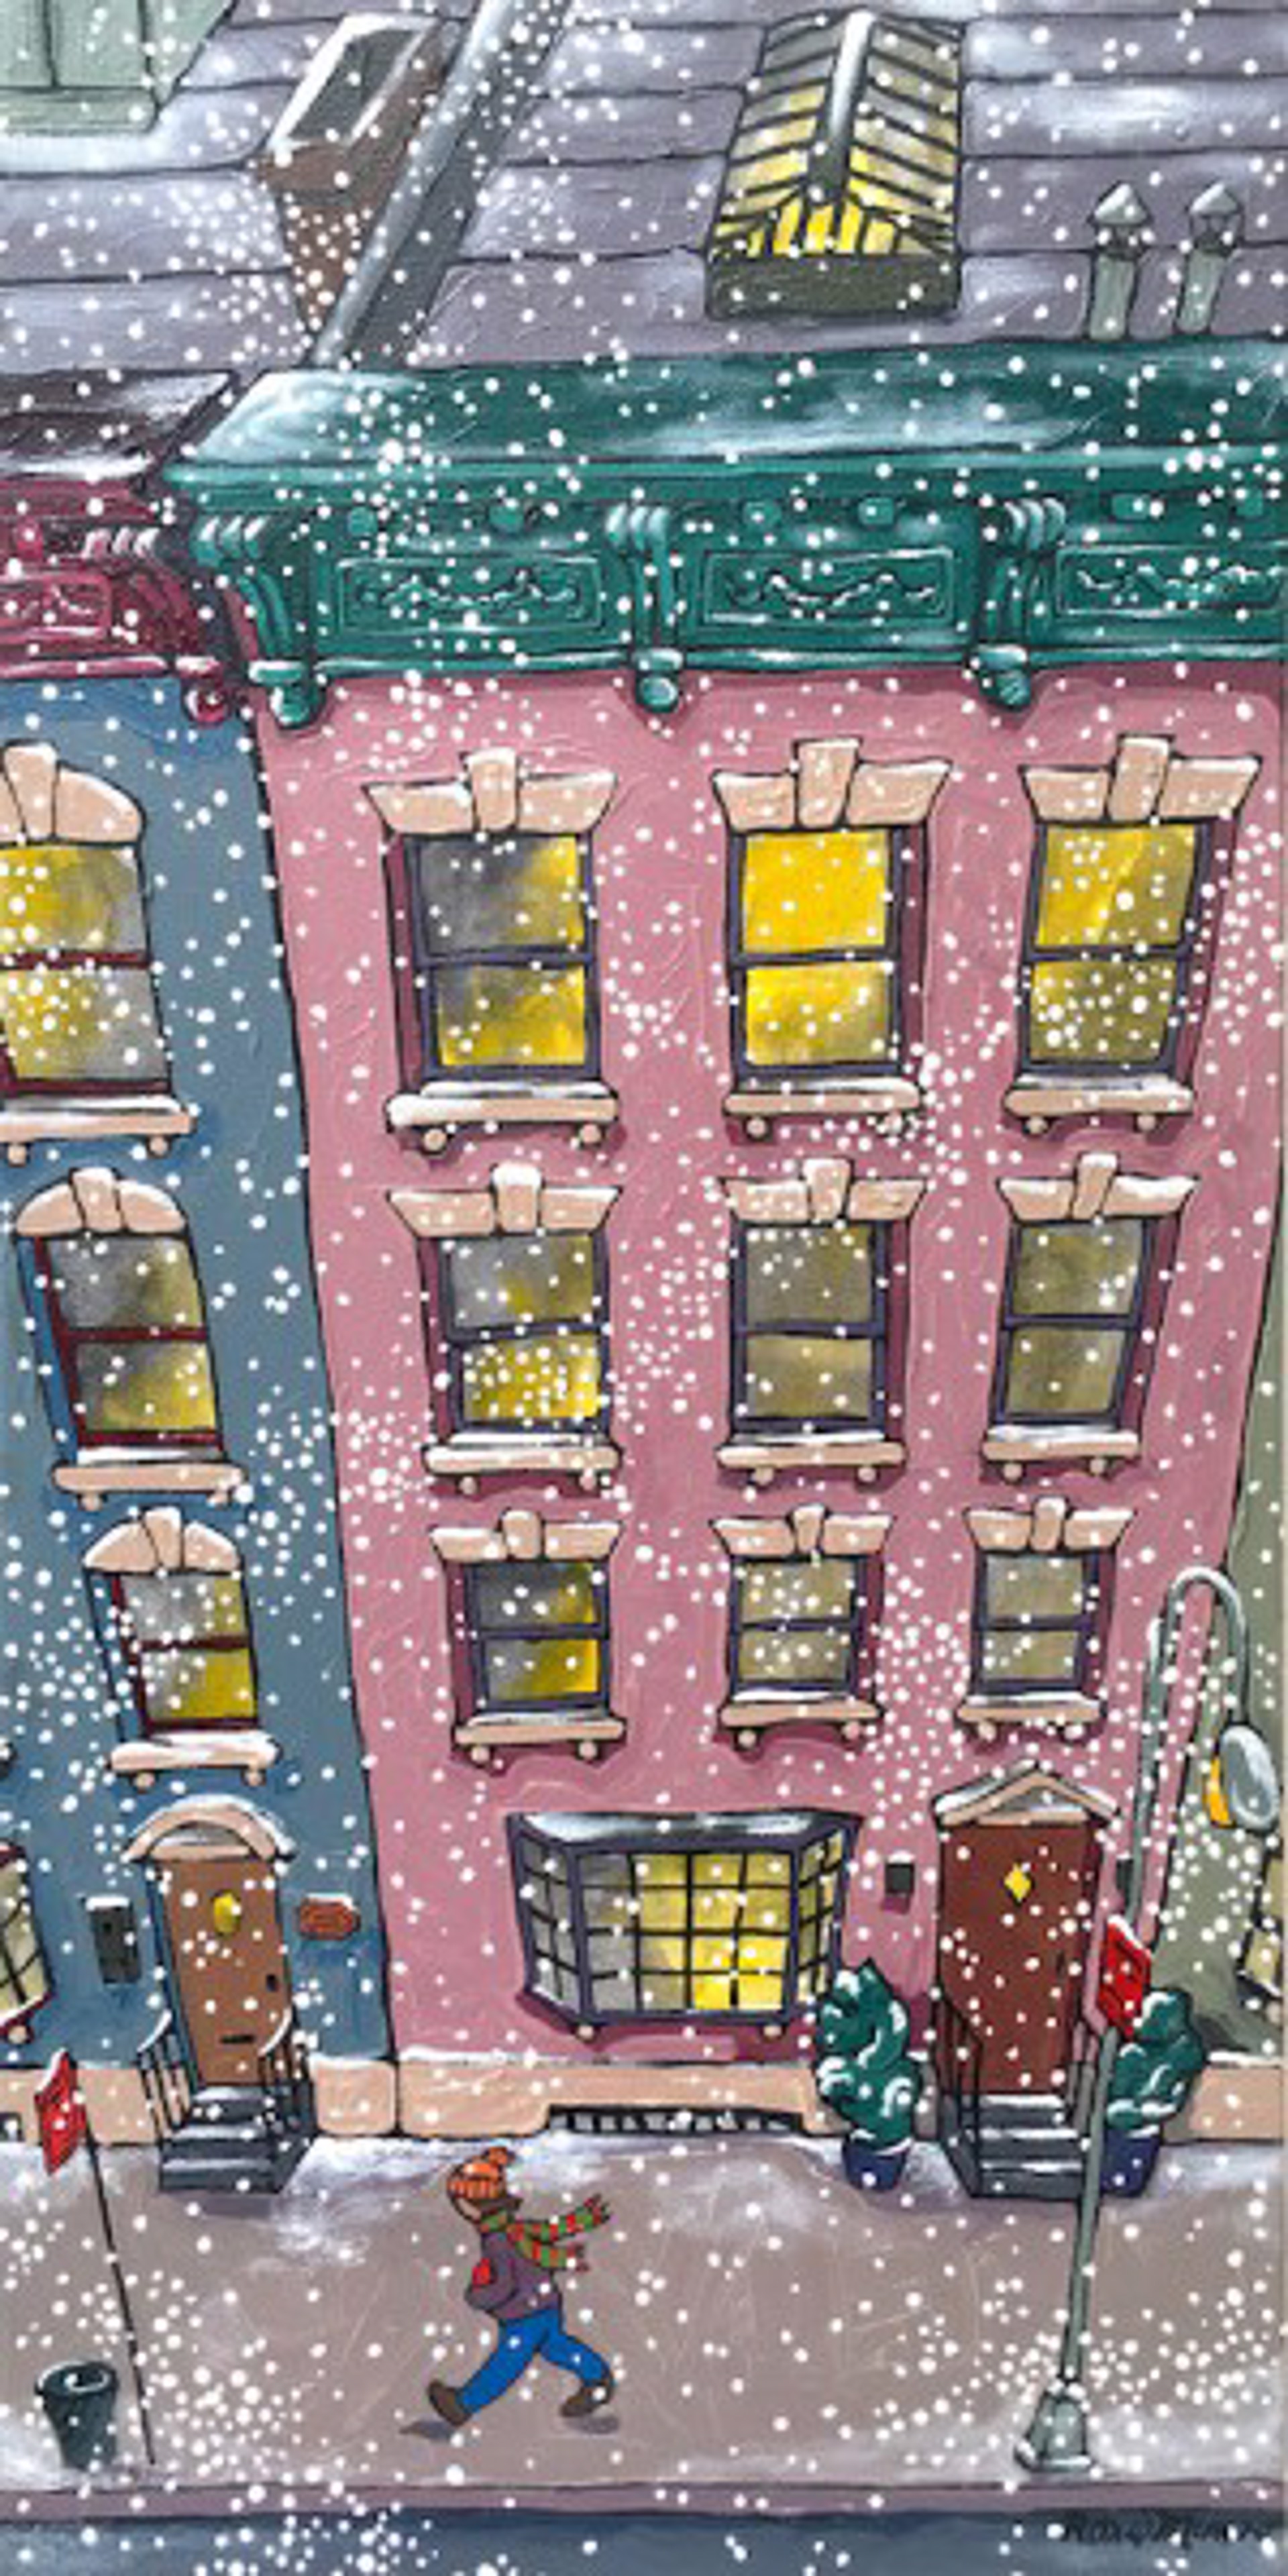 City Solitaire, Snowy Day II by Roxie Munro